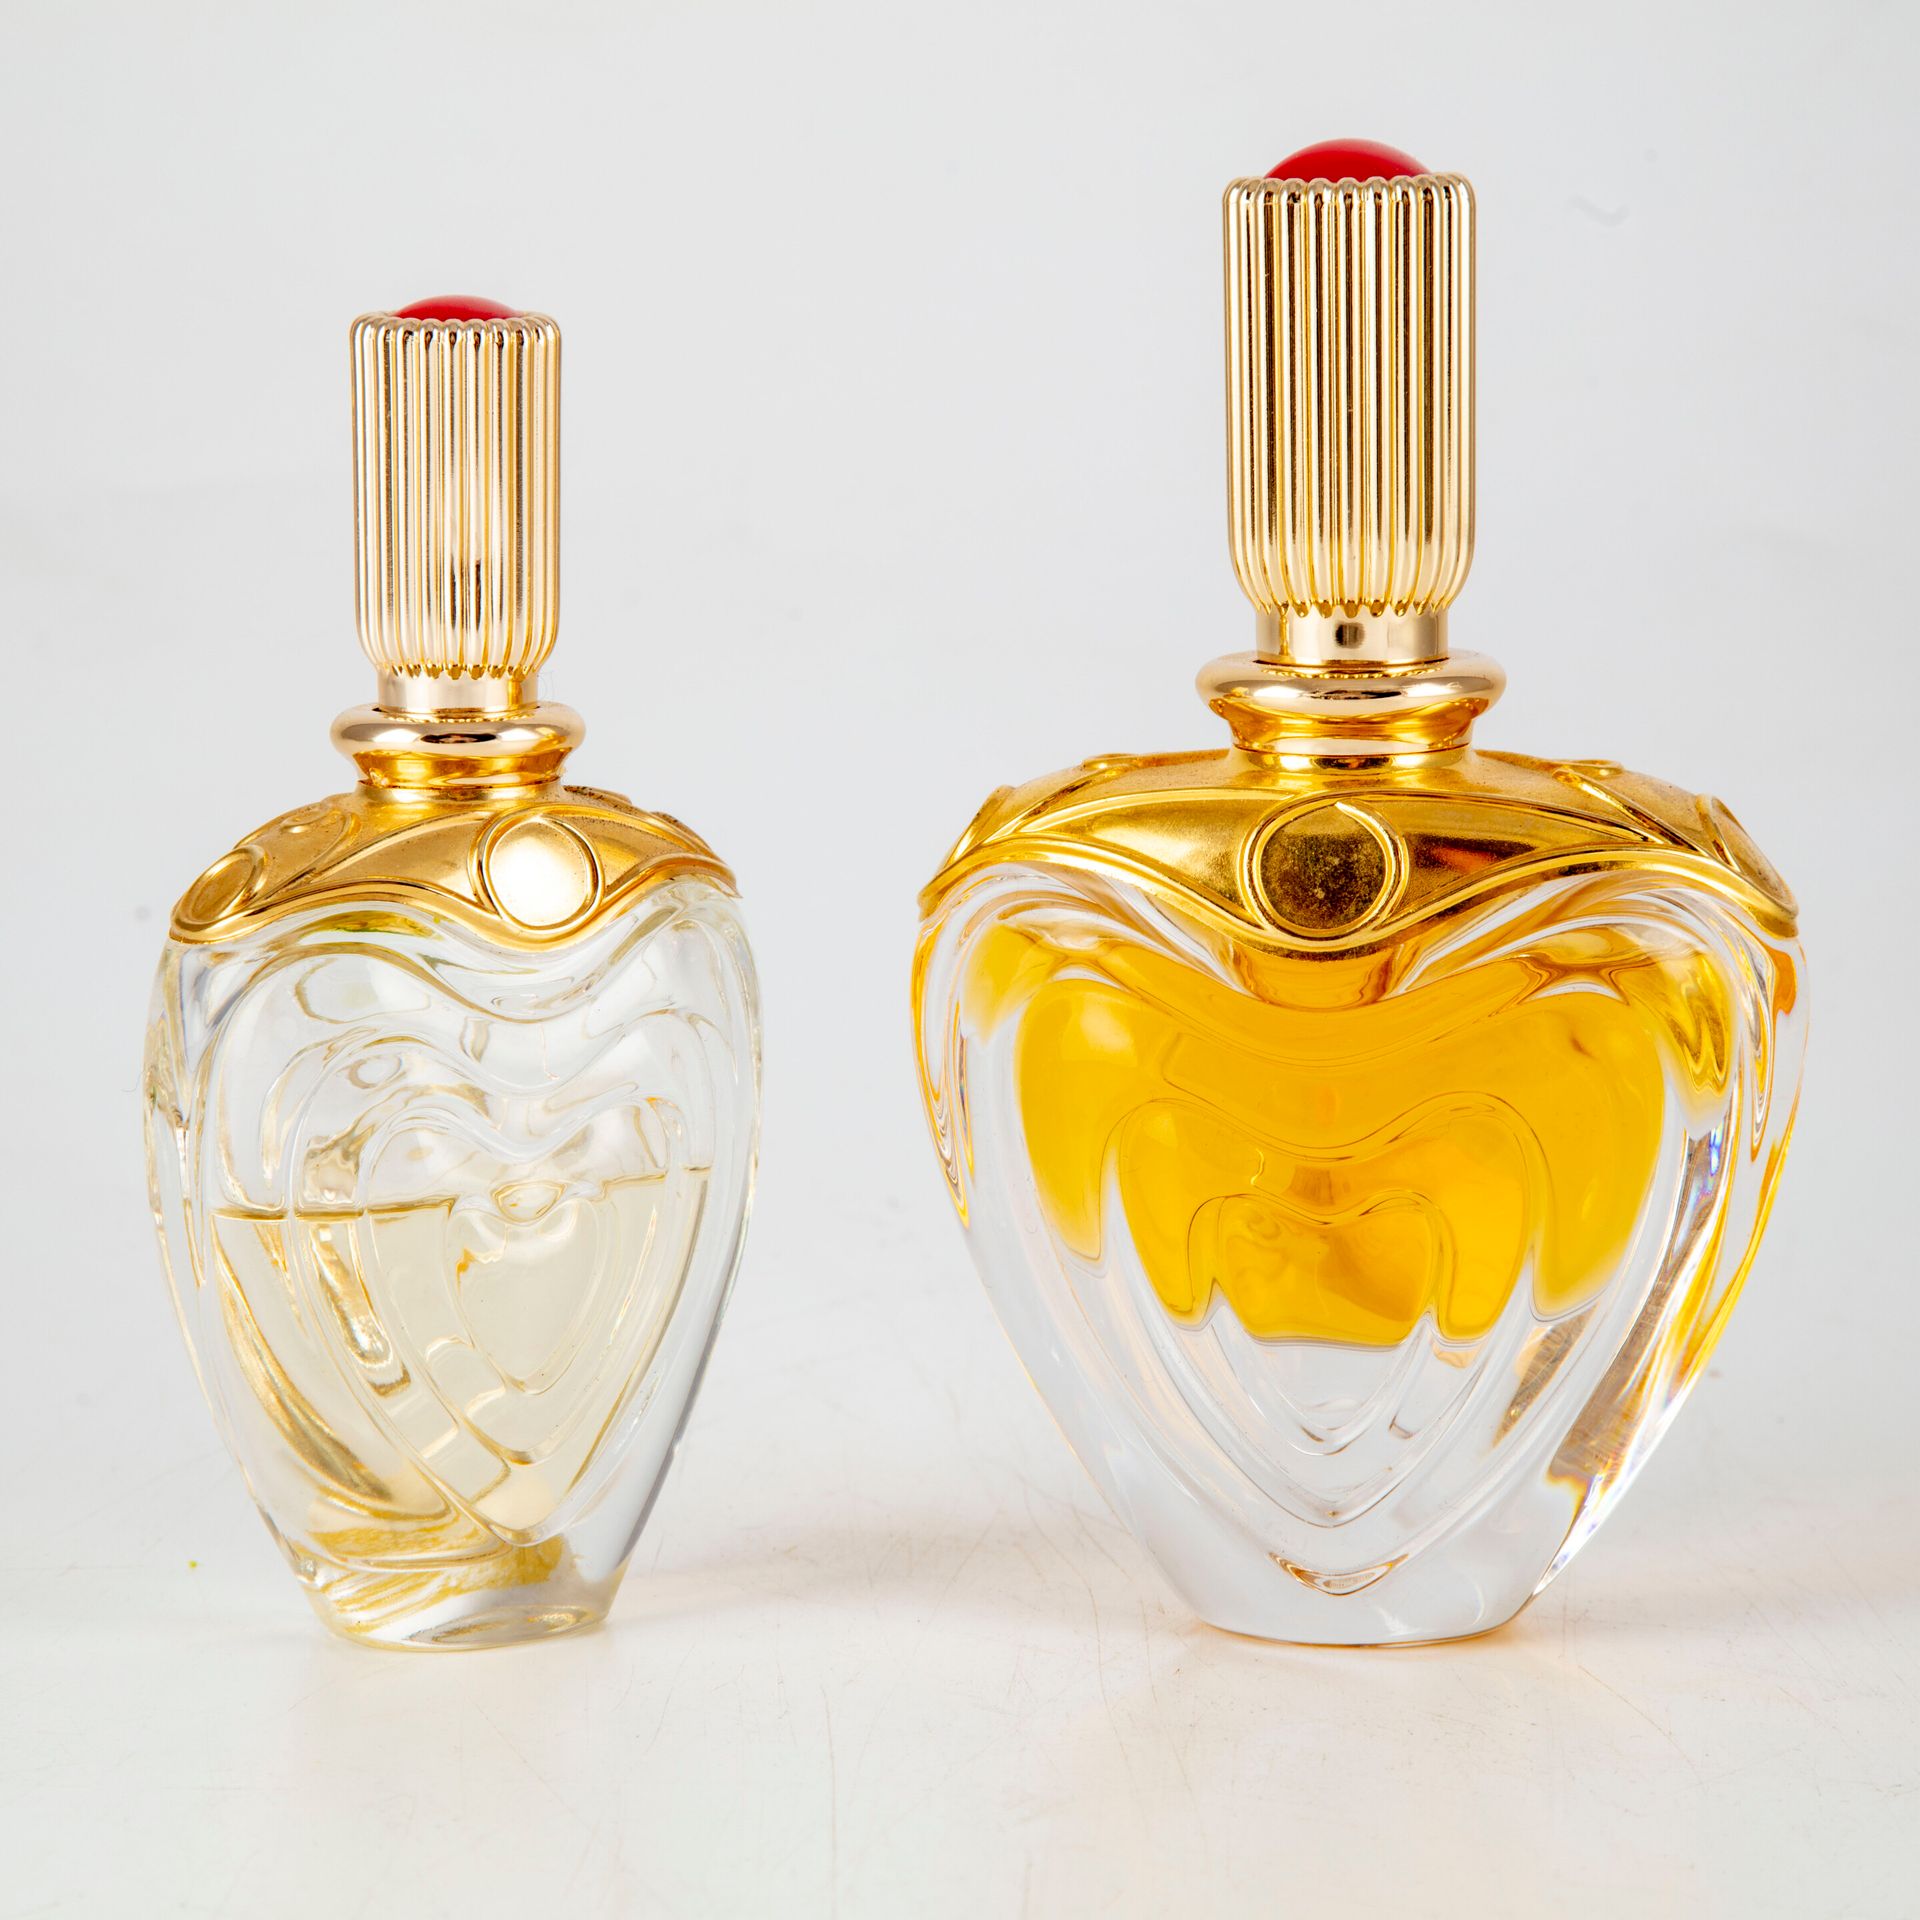 Null ESCADA

Set of two perfume bottles, dummy 

H. 13,5 and 14,5 cm